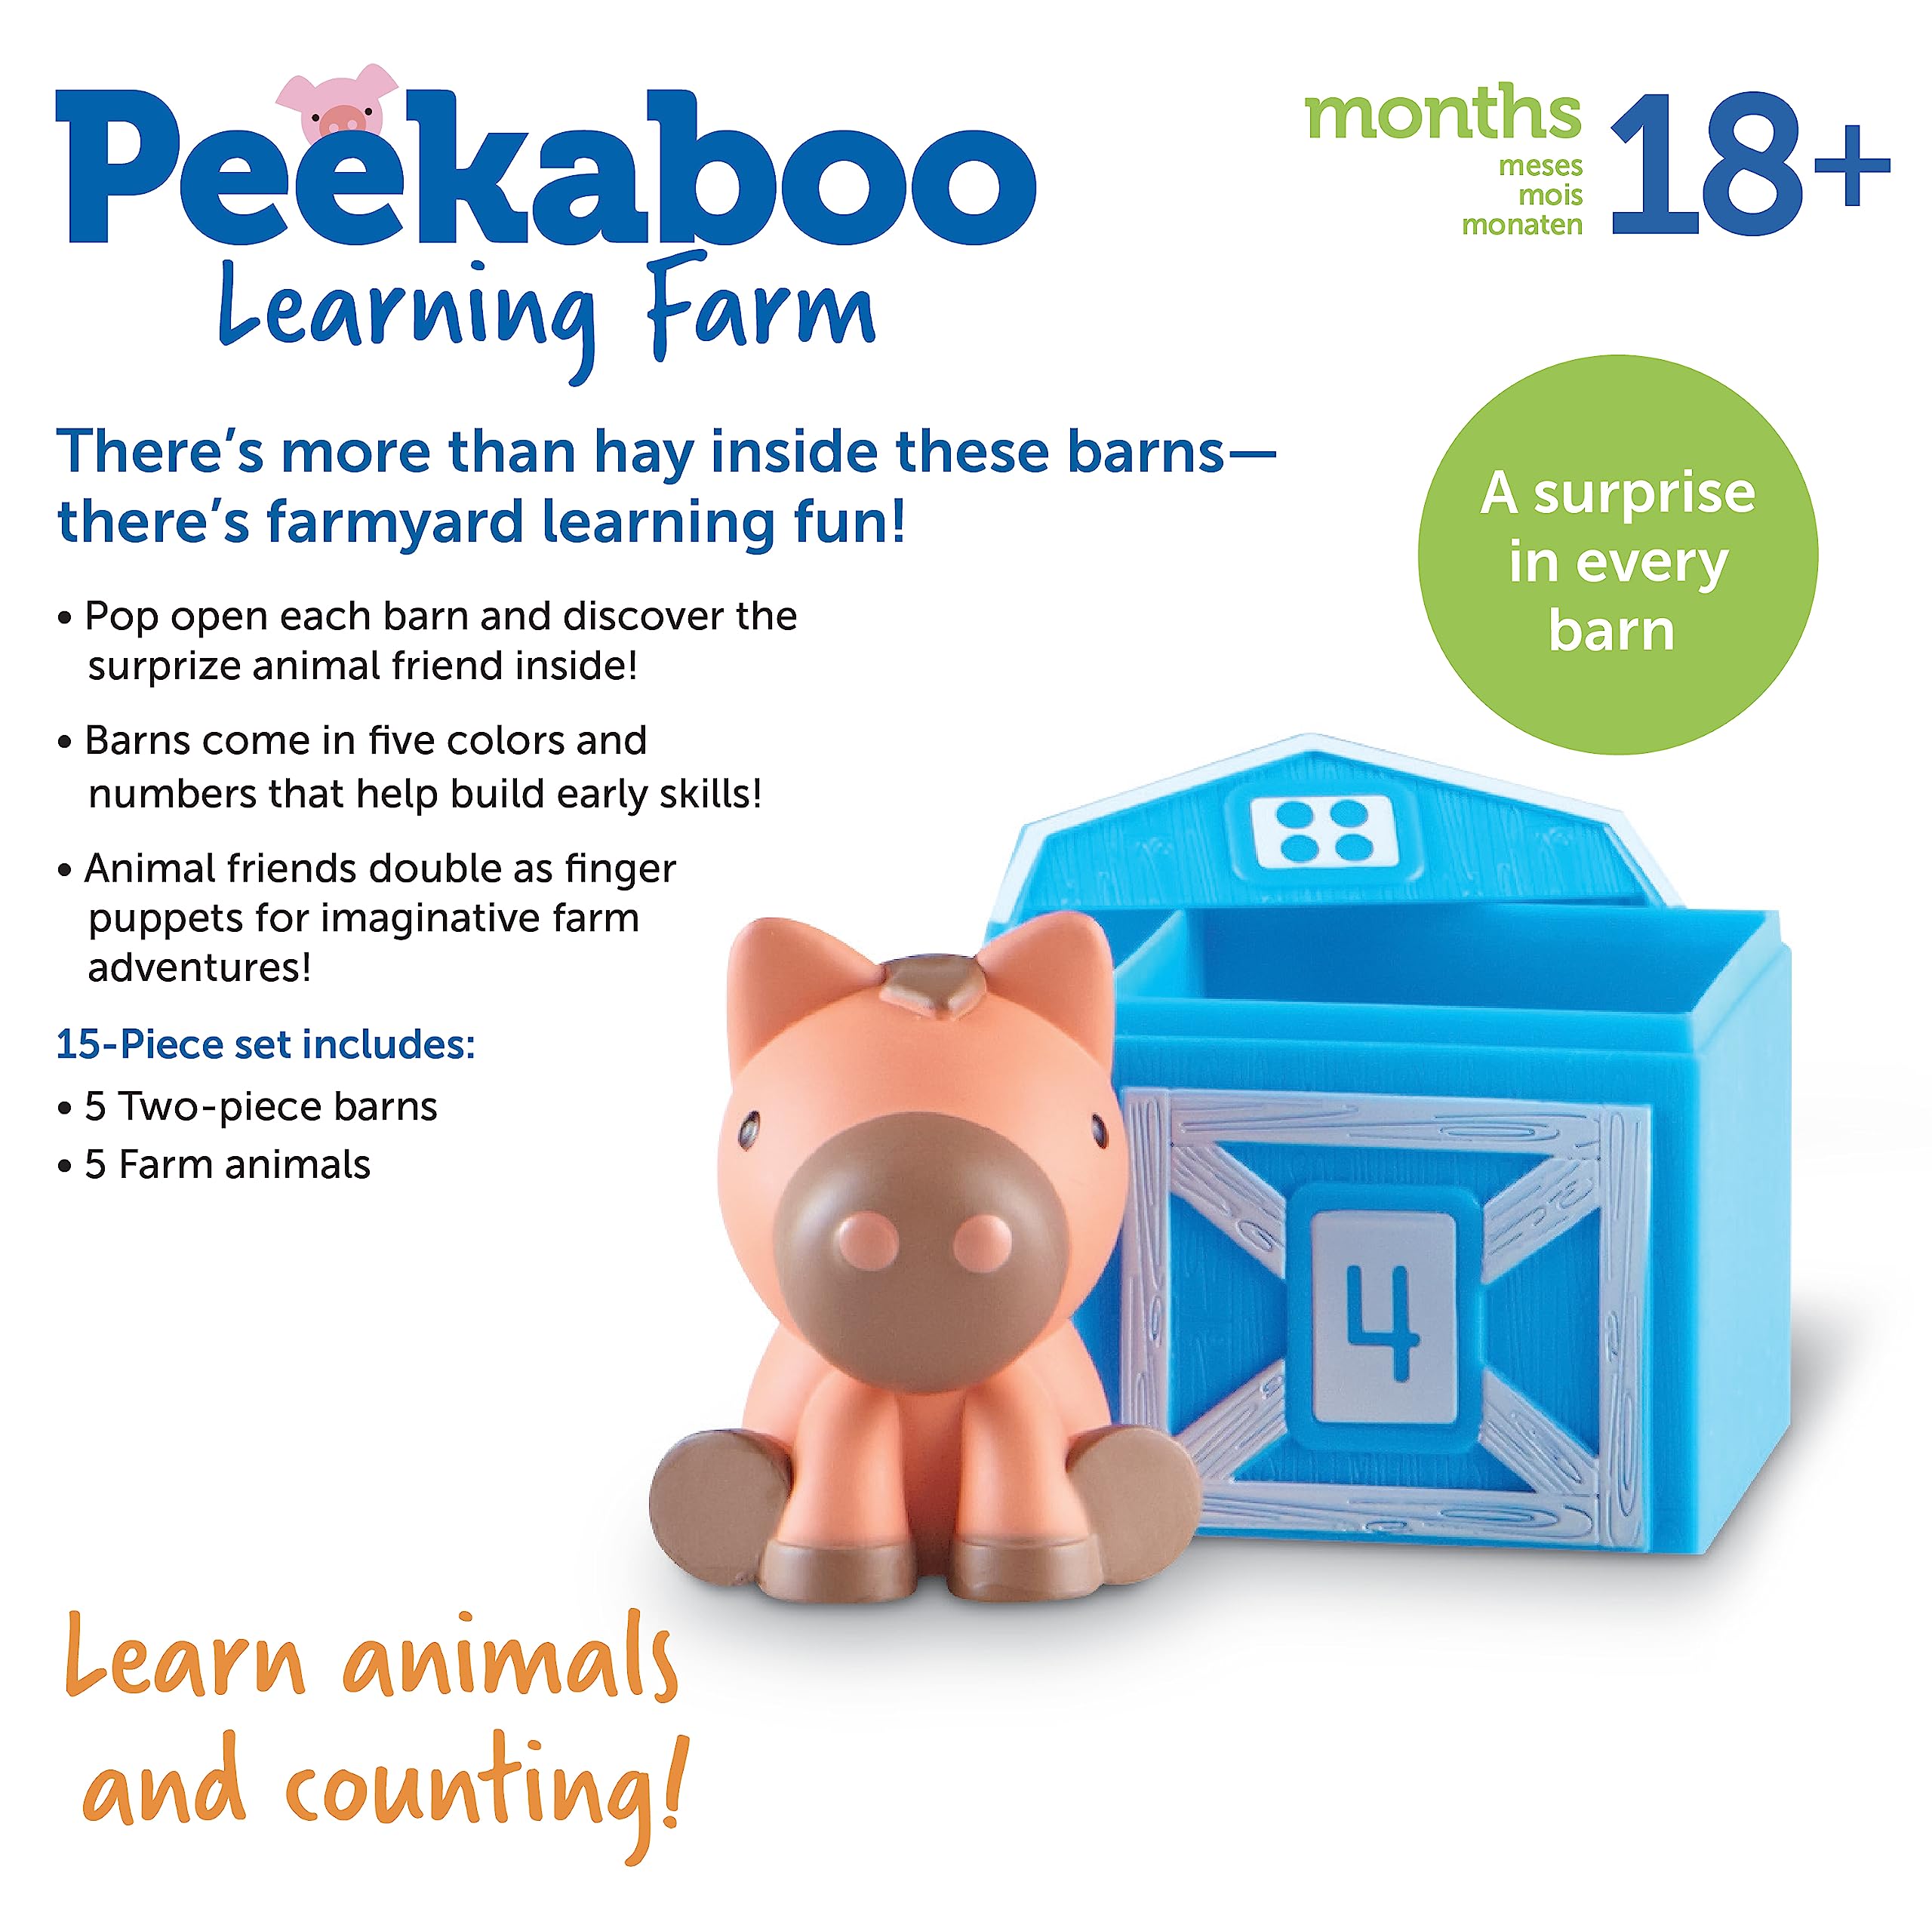 Learning Resources Peekaboo Learning Farm - 10 Pieces, Ages 18+ months Toddler Learning Toys, Counting and Sorting Toys, Farm Animals Toys,Back to School